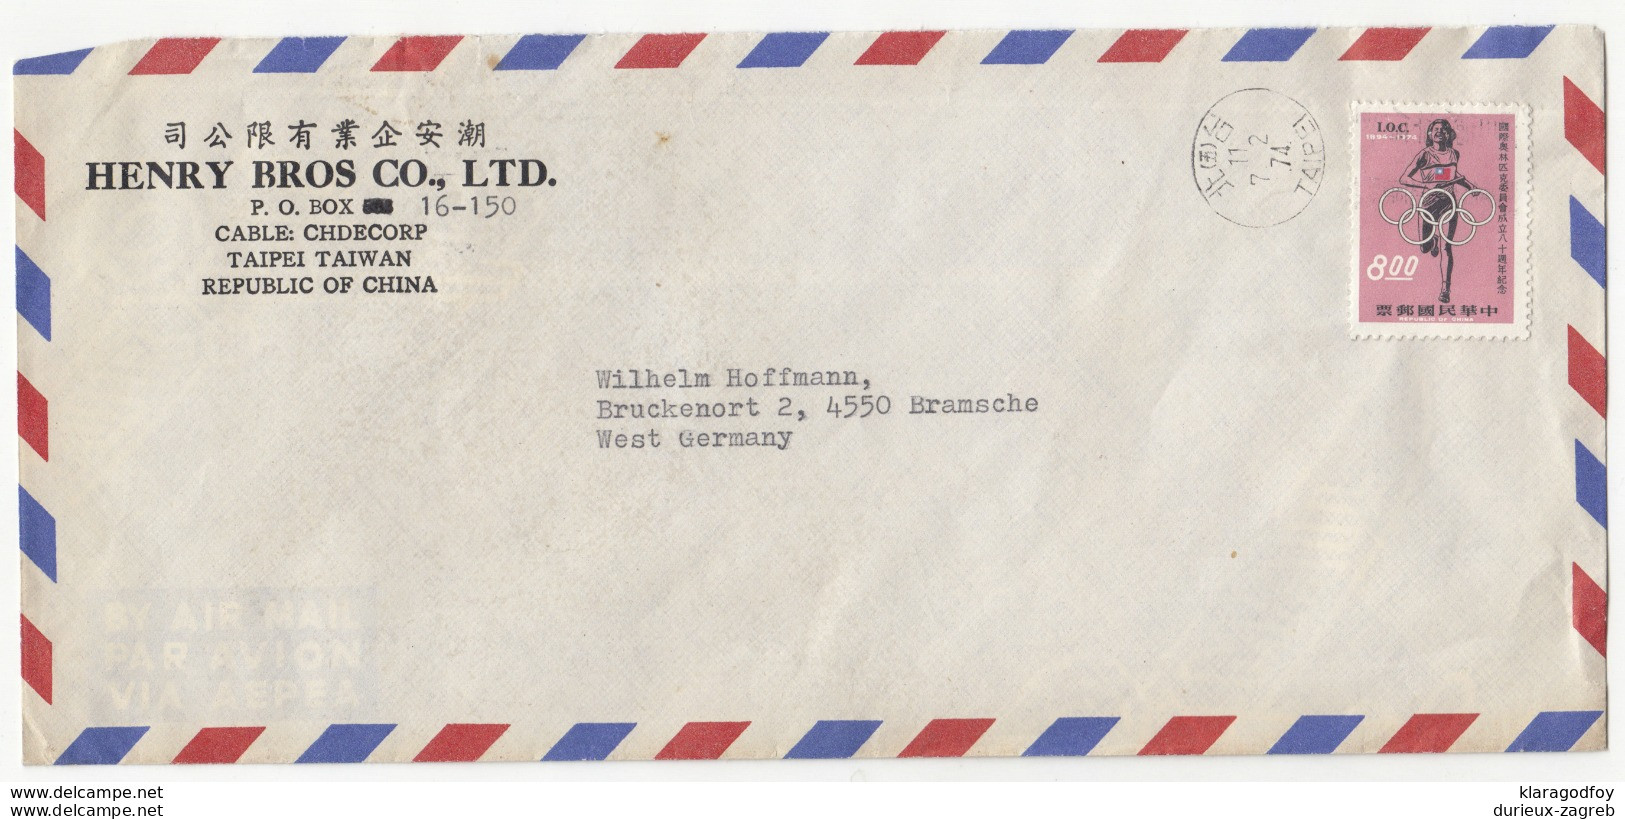 Henry Bros Co. Taipei Company Air Mail Letter Cover Travelled 1974 To Germany  B190920 - Briefe U. Dokumente